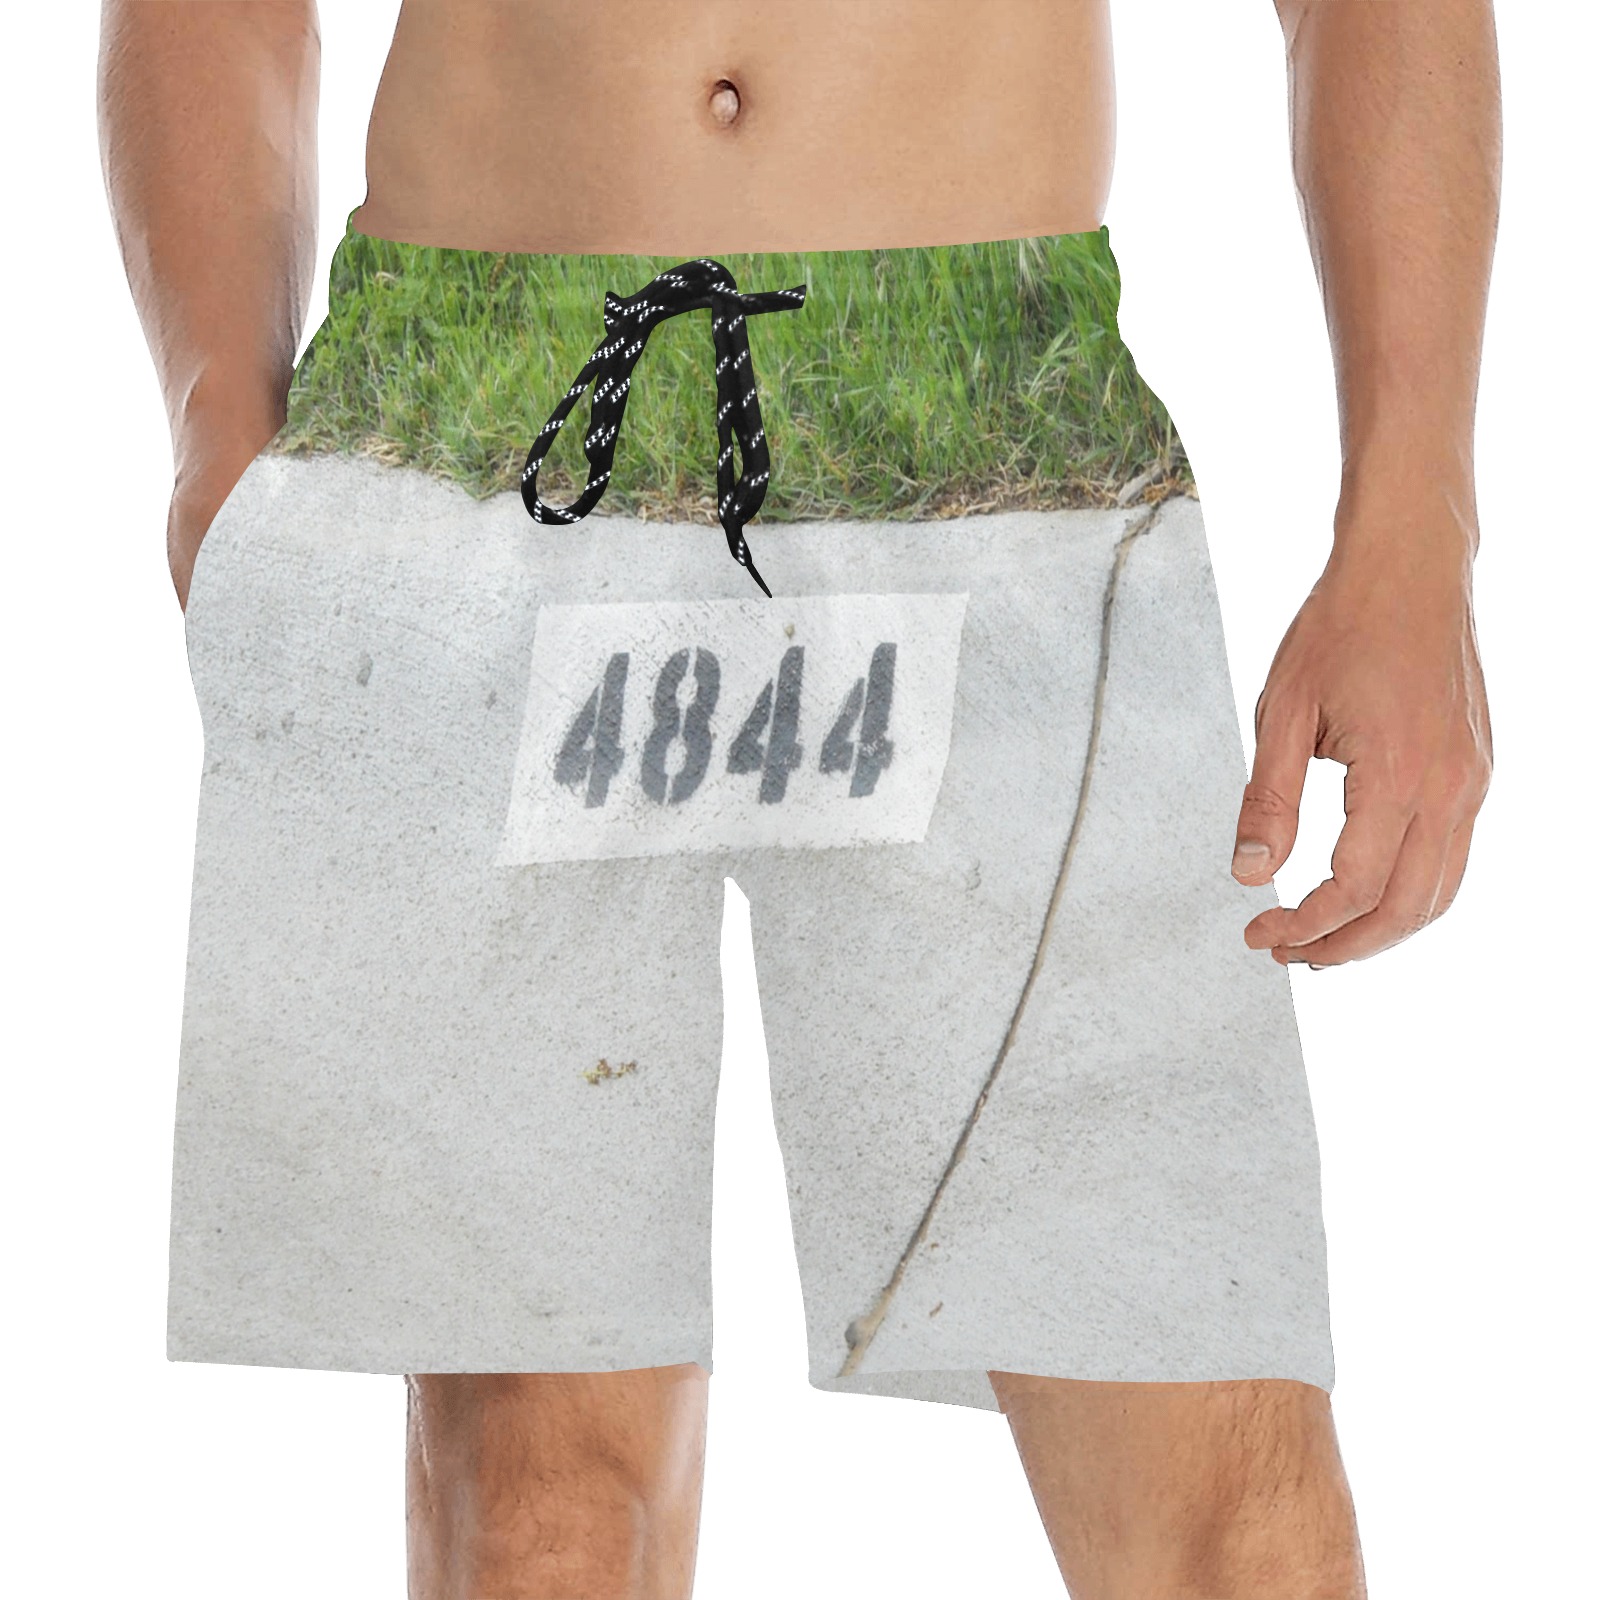 Street Number 4844 with Black Tie Men's Mid-Length Beach Shorts (Model L51)